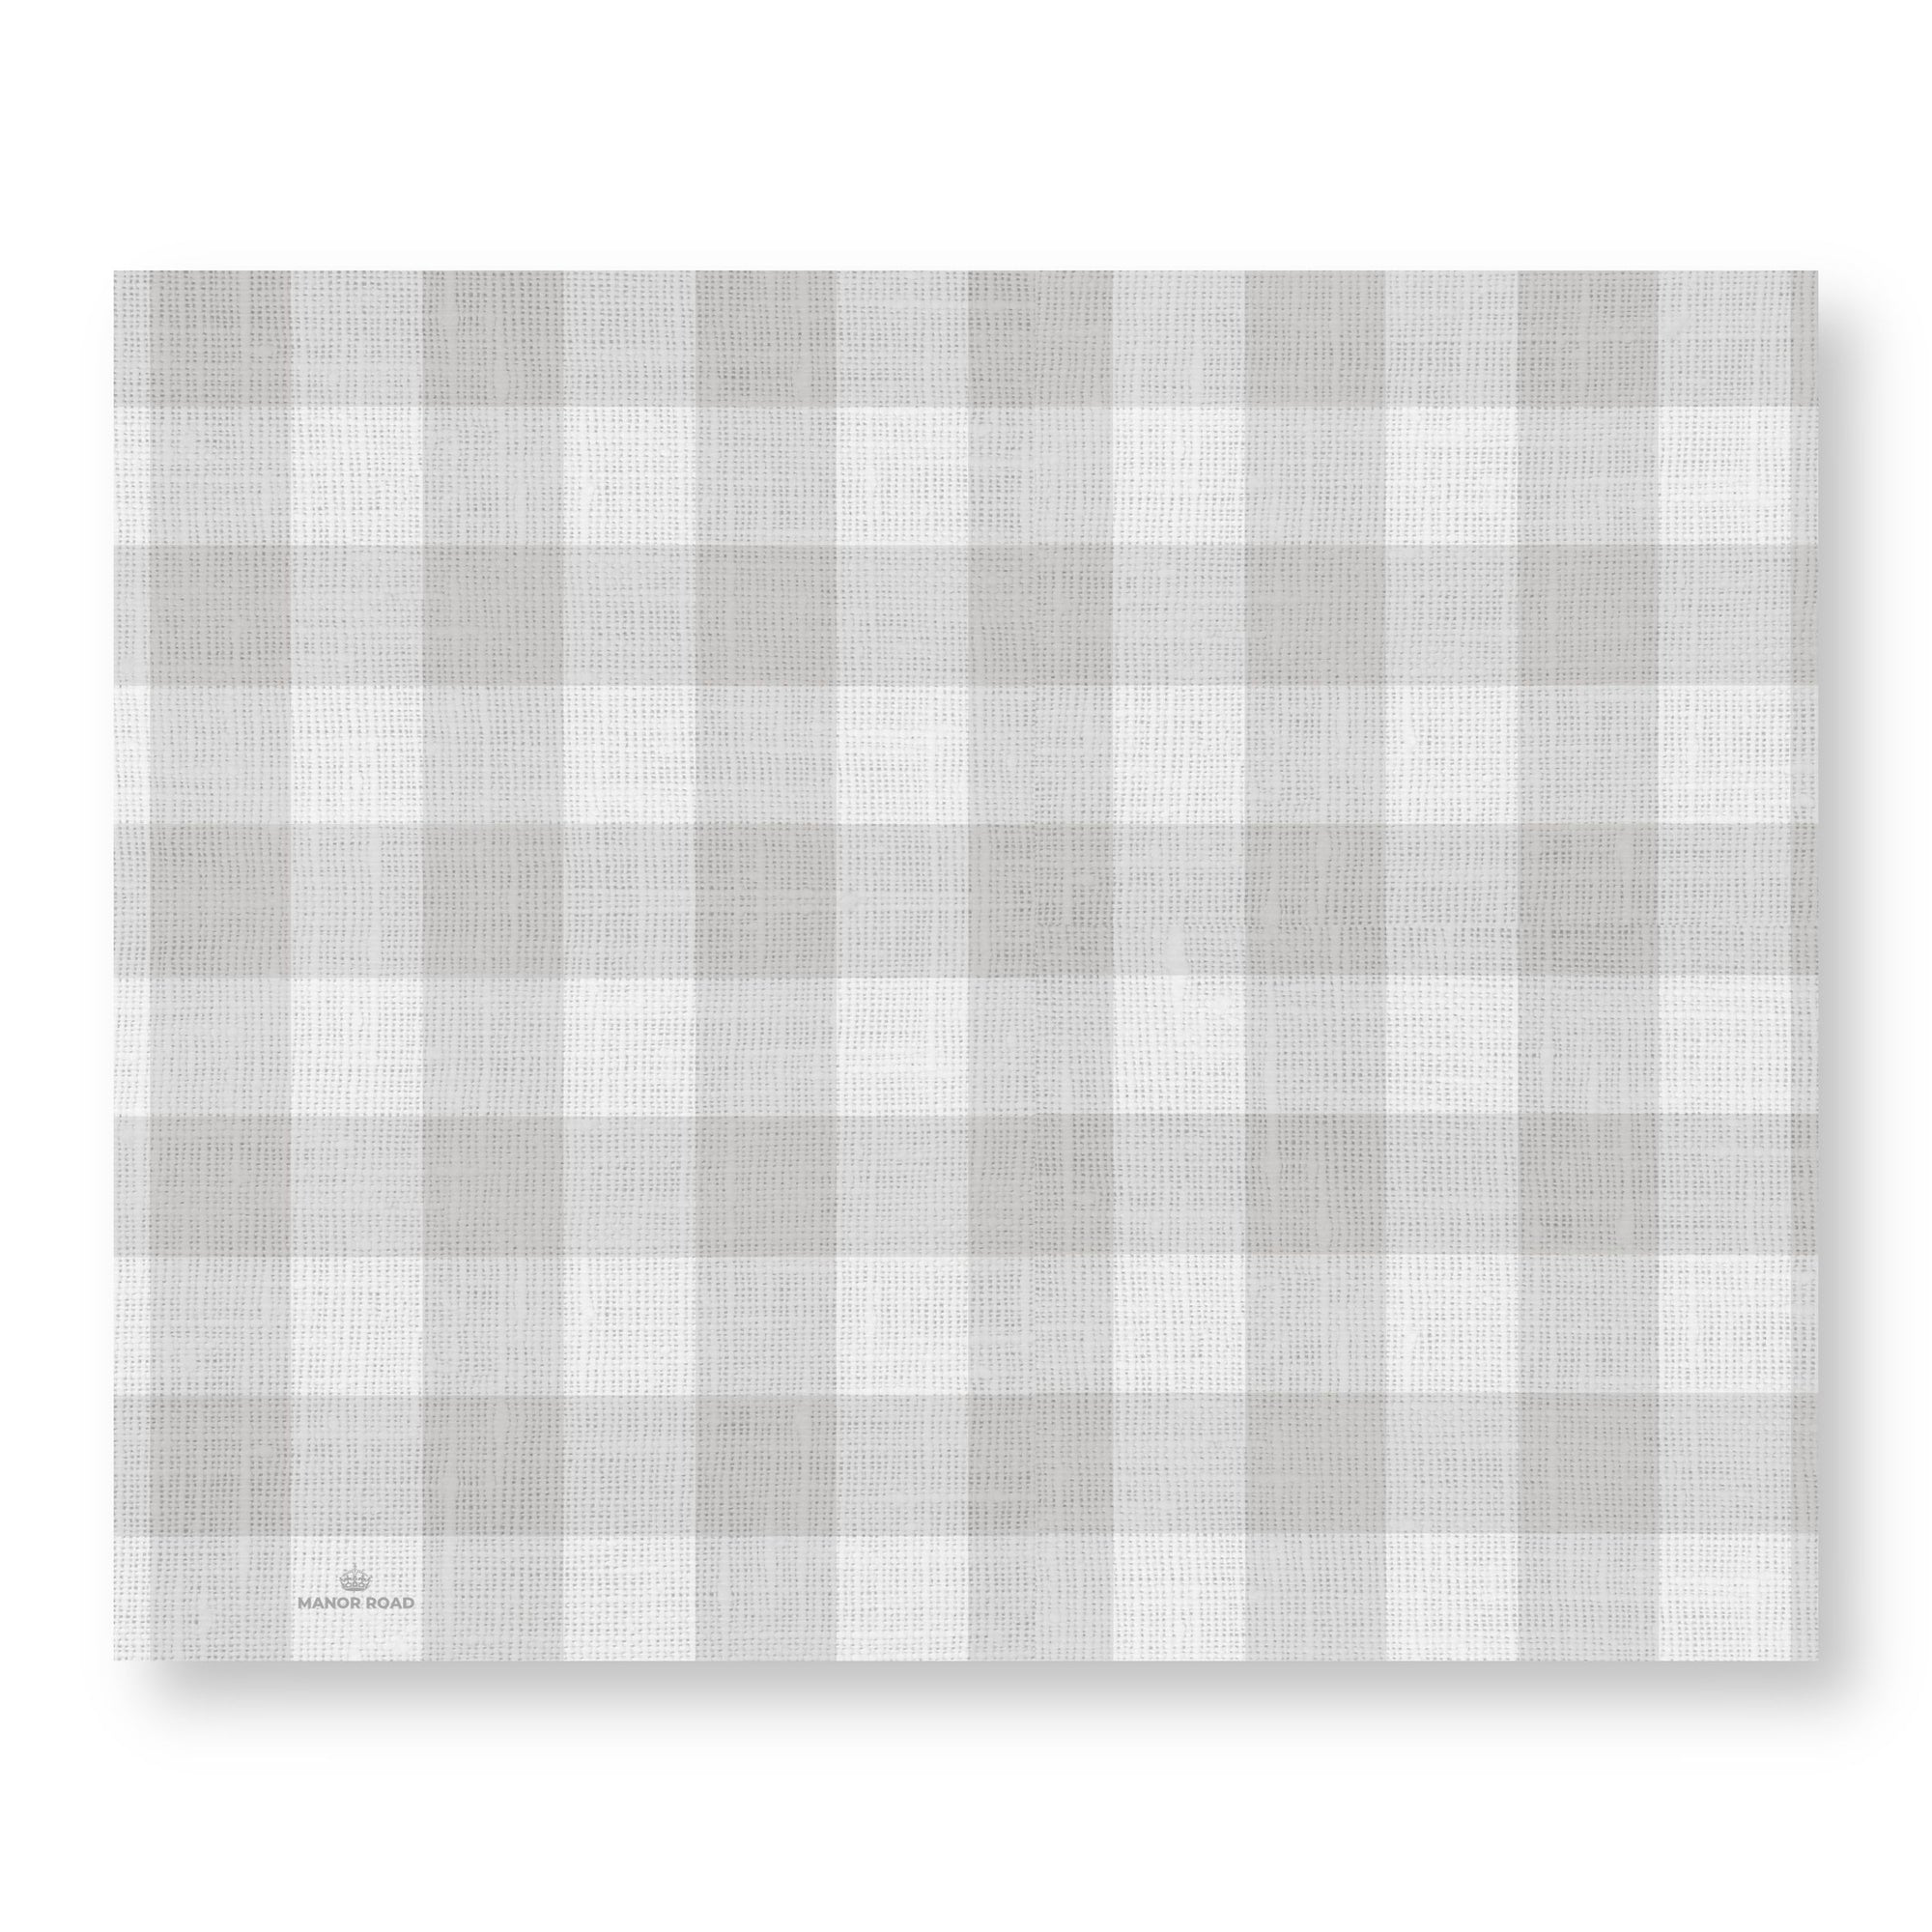 Manor Road Linen Gingham Soft Grey Placemats 30Pk (Case of 2)